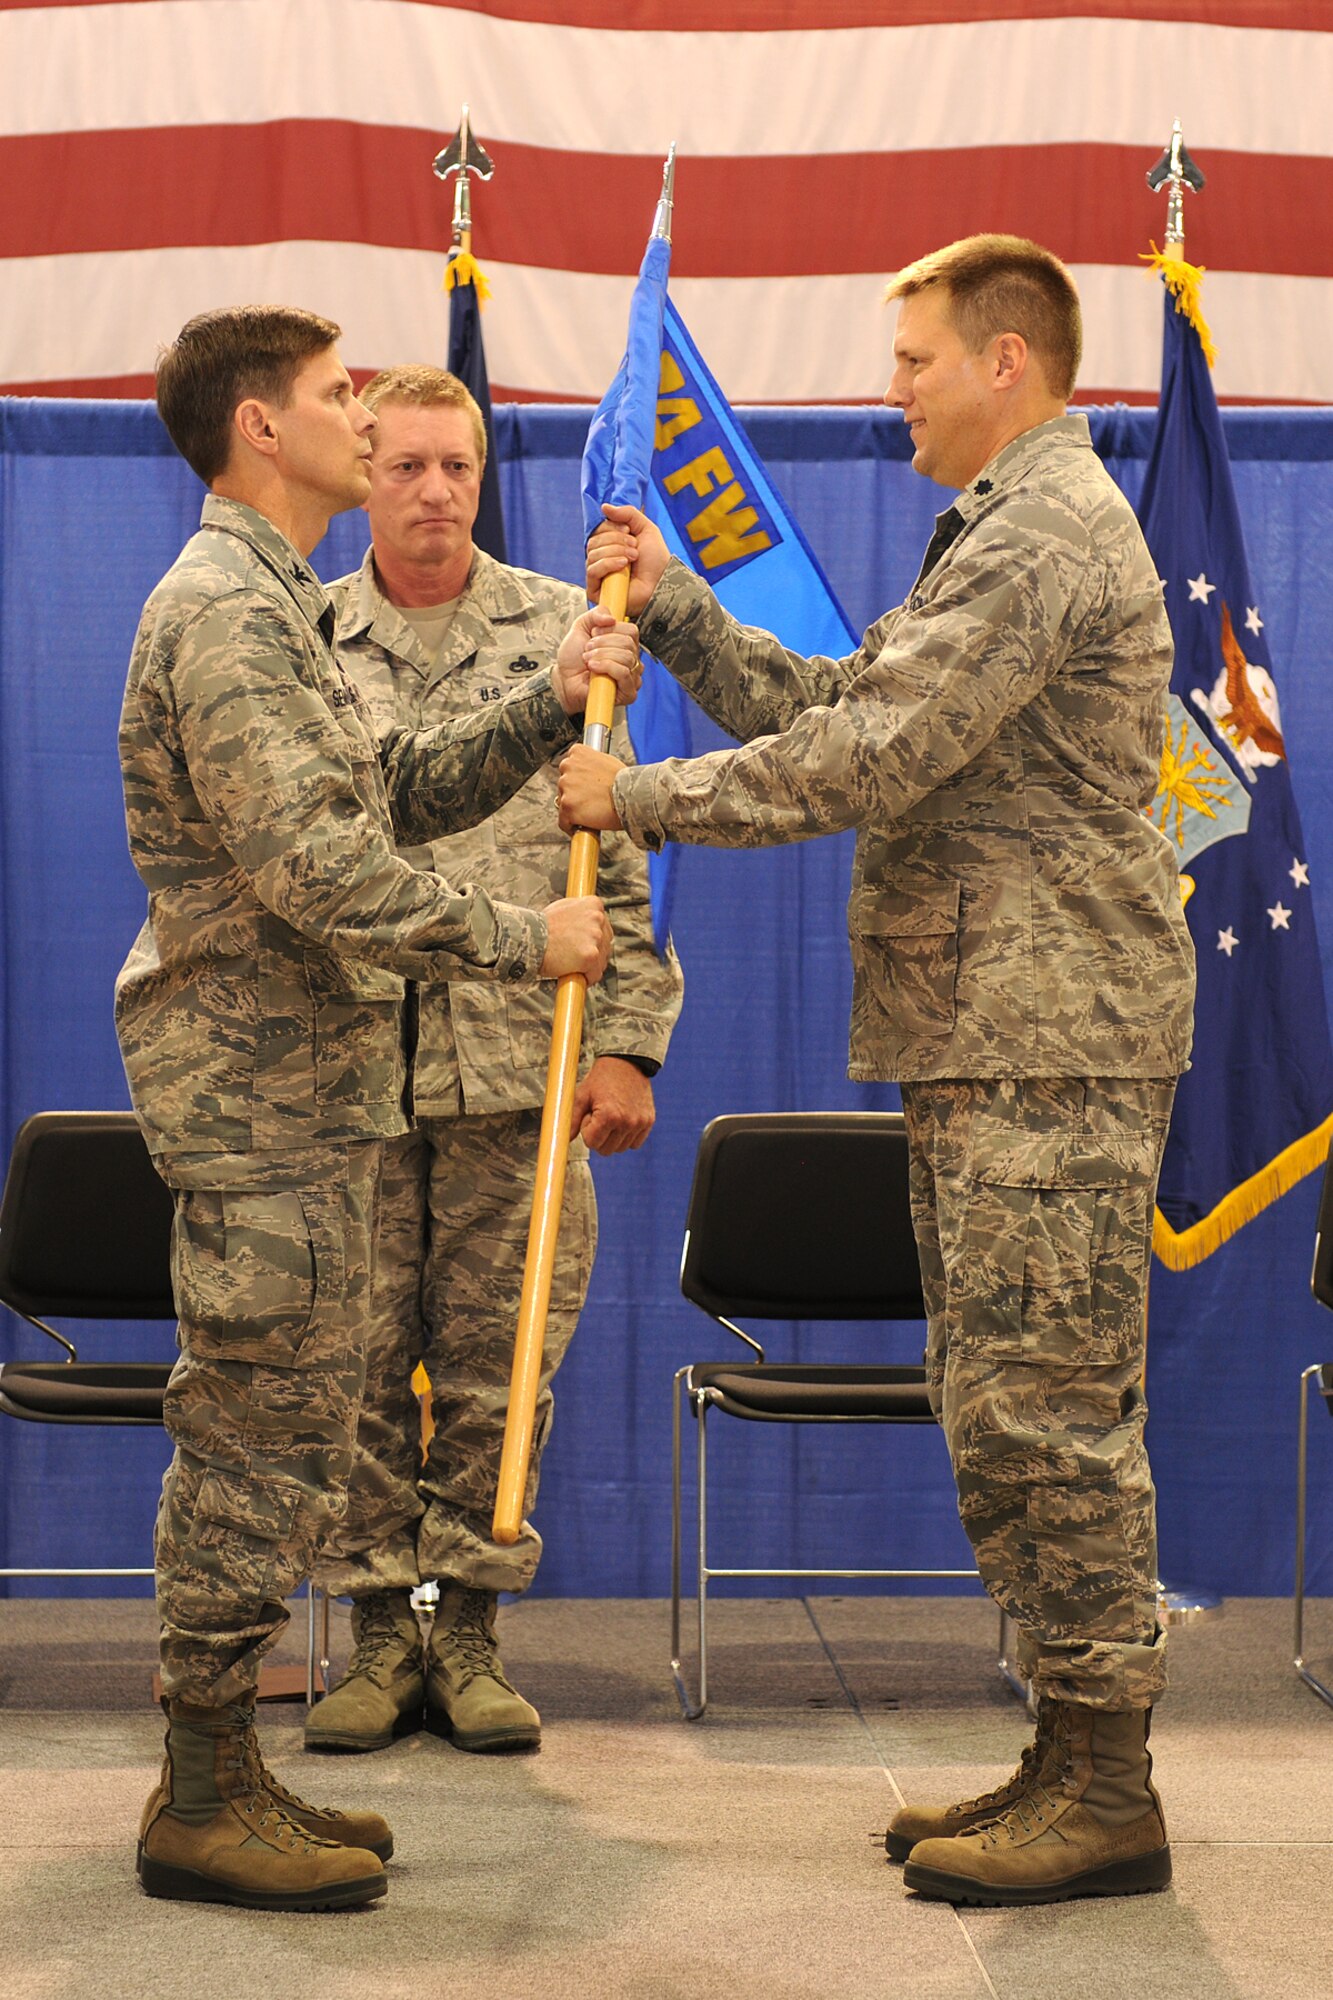 New York Air National Guard Lt. Col. Michael Smith (right) receives the 174th Fighter Wing Maintenance Group Guideon from 174th Fighter Wing Commander Col. Greg Semmel during a change of command ceremony held on August 11, 2012 at Hancock Field Air National Guard Base.  Lt. Col. Smith assumed command of the Maintenance Group from Col. John Balbierer. Lt. Col. Smith previously served as commander of the 138th Fighter Squadron stationed on Hancock Field.. (Photo by New York Air National Guard Staff Sgt. James N. Faso II/Released)